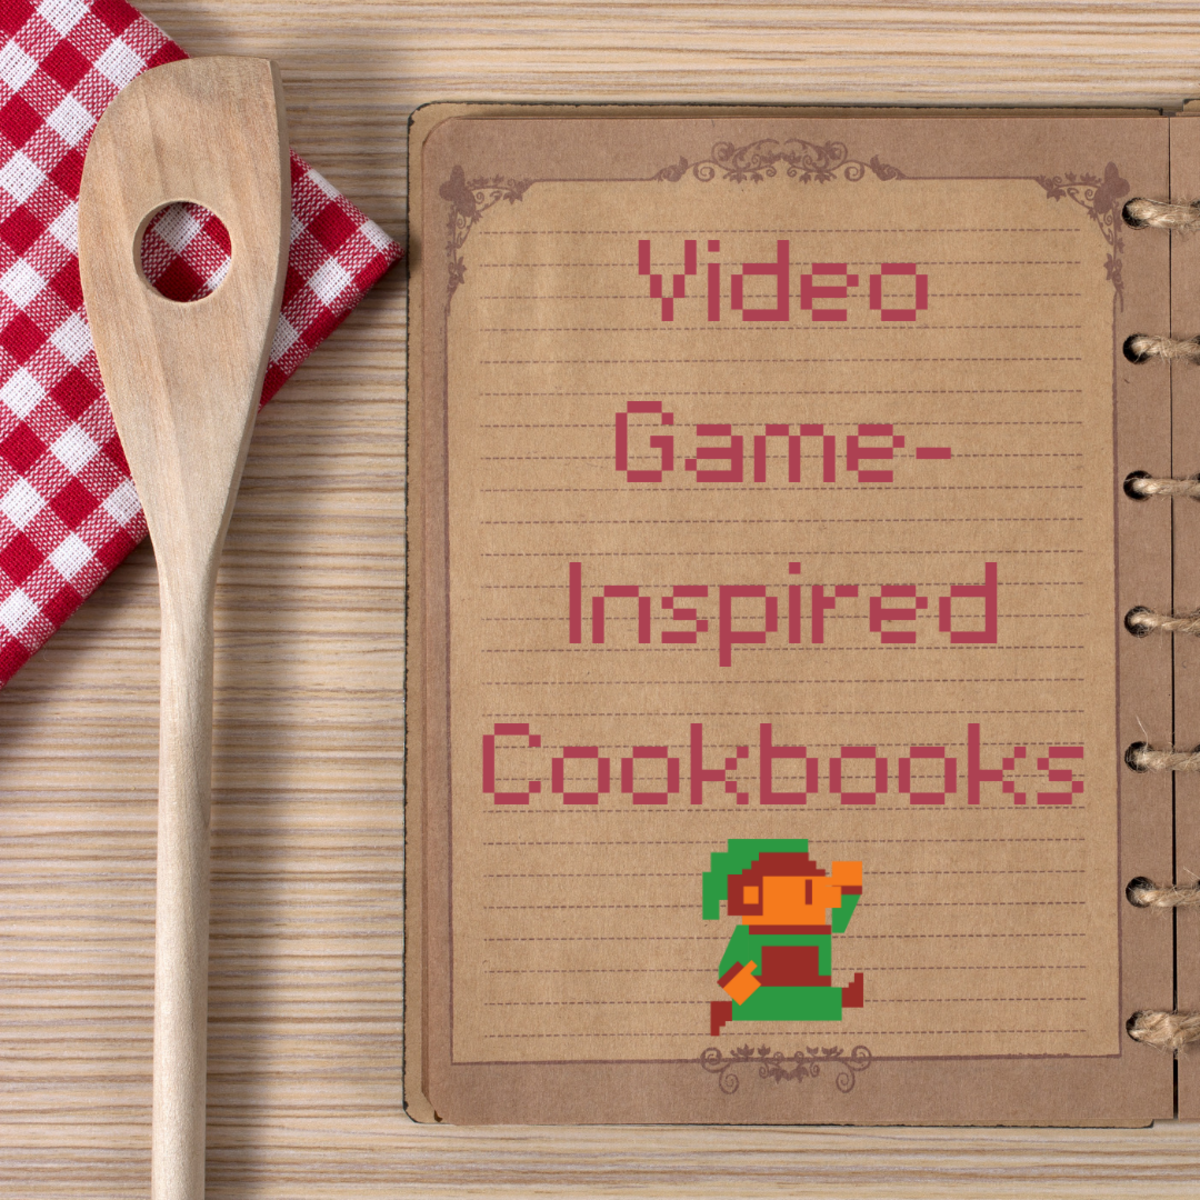 Check out these cookbooks inspired by popular video games. 